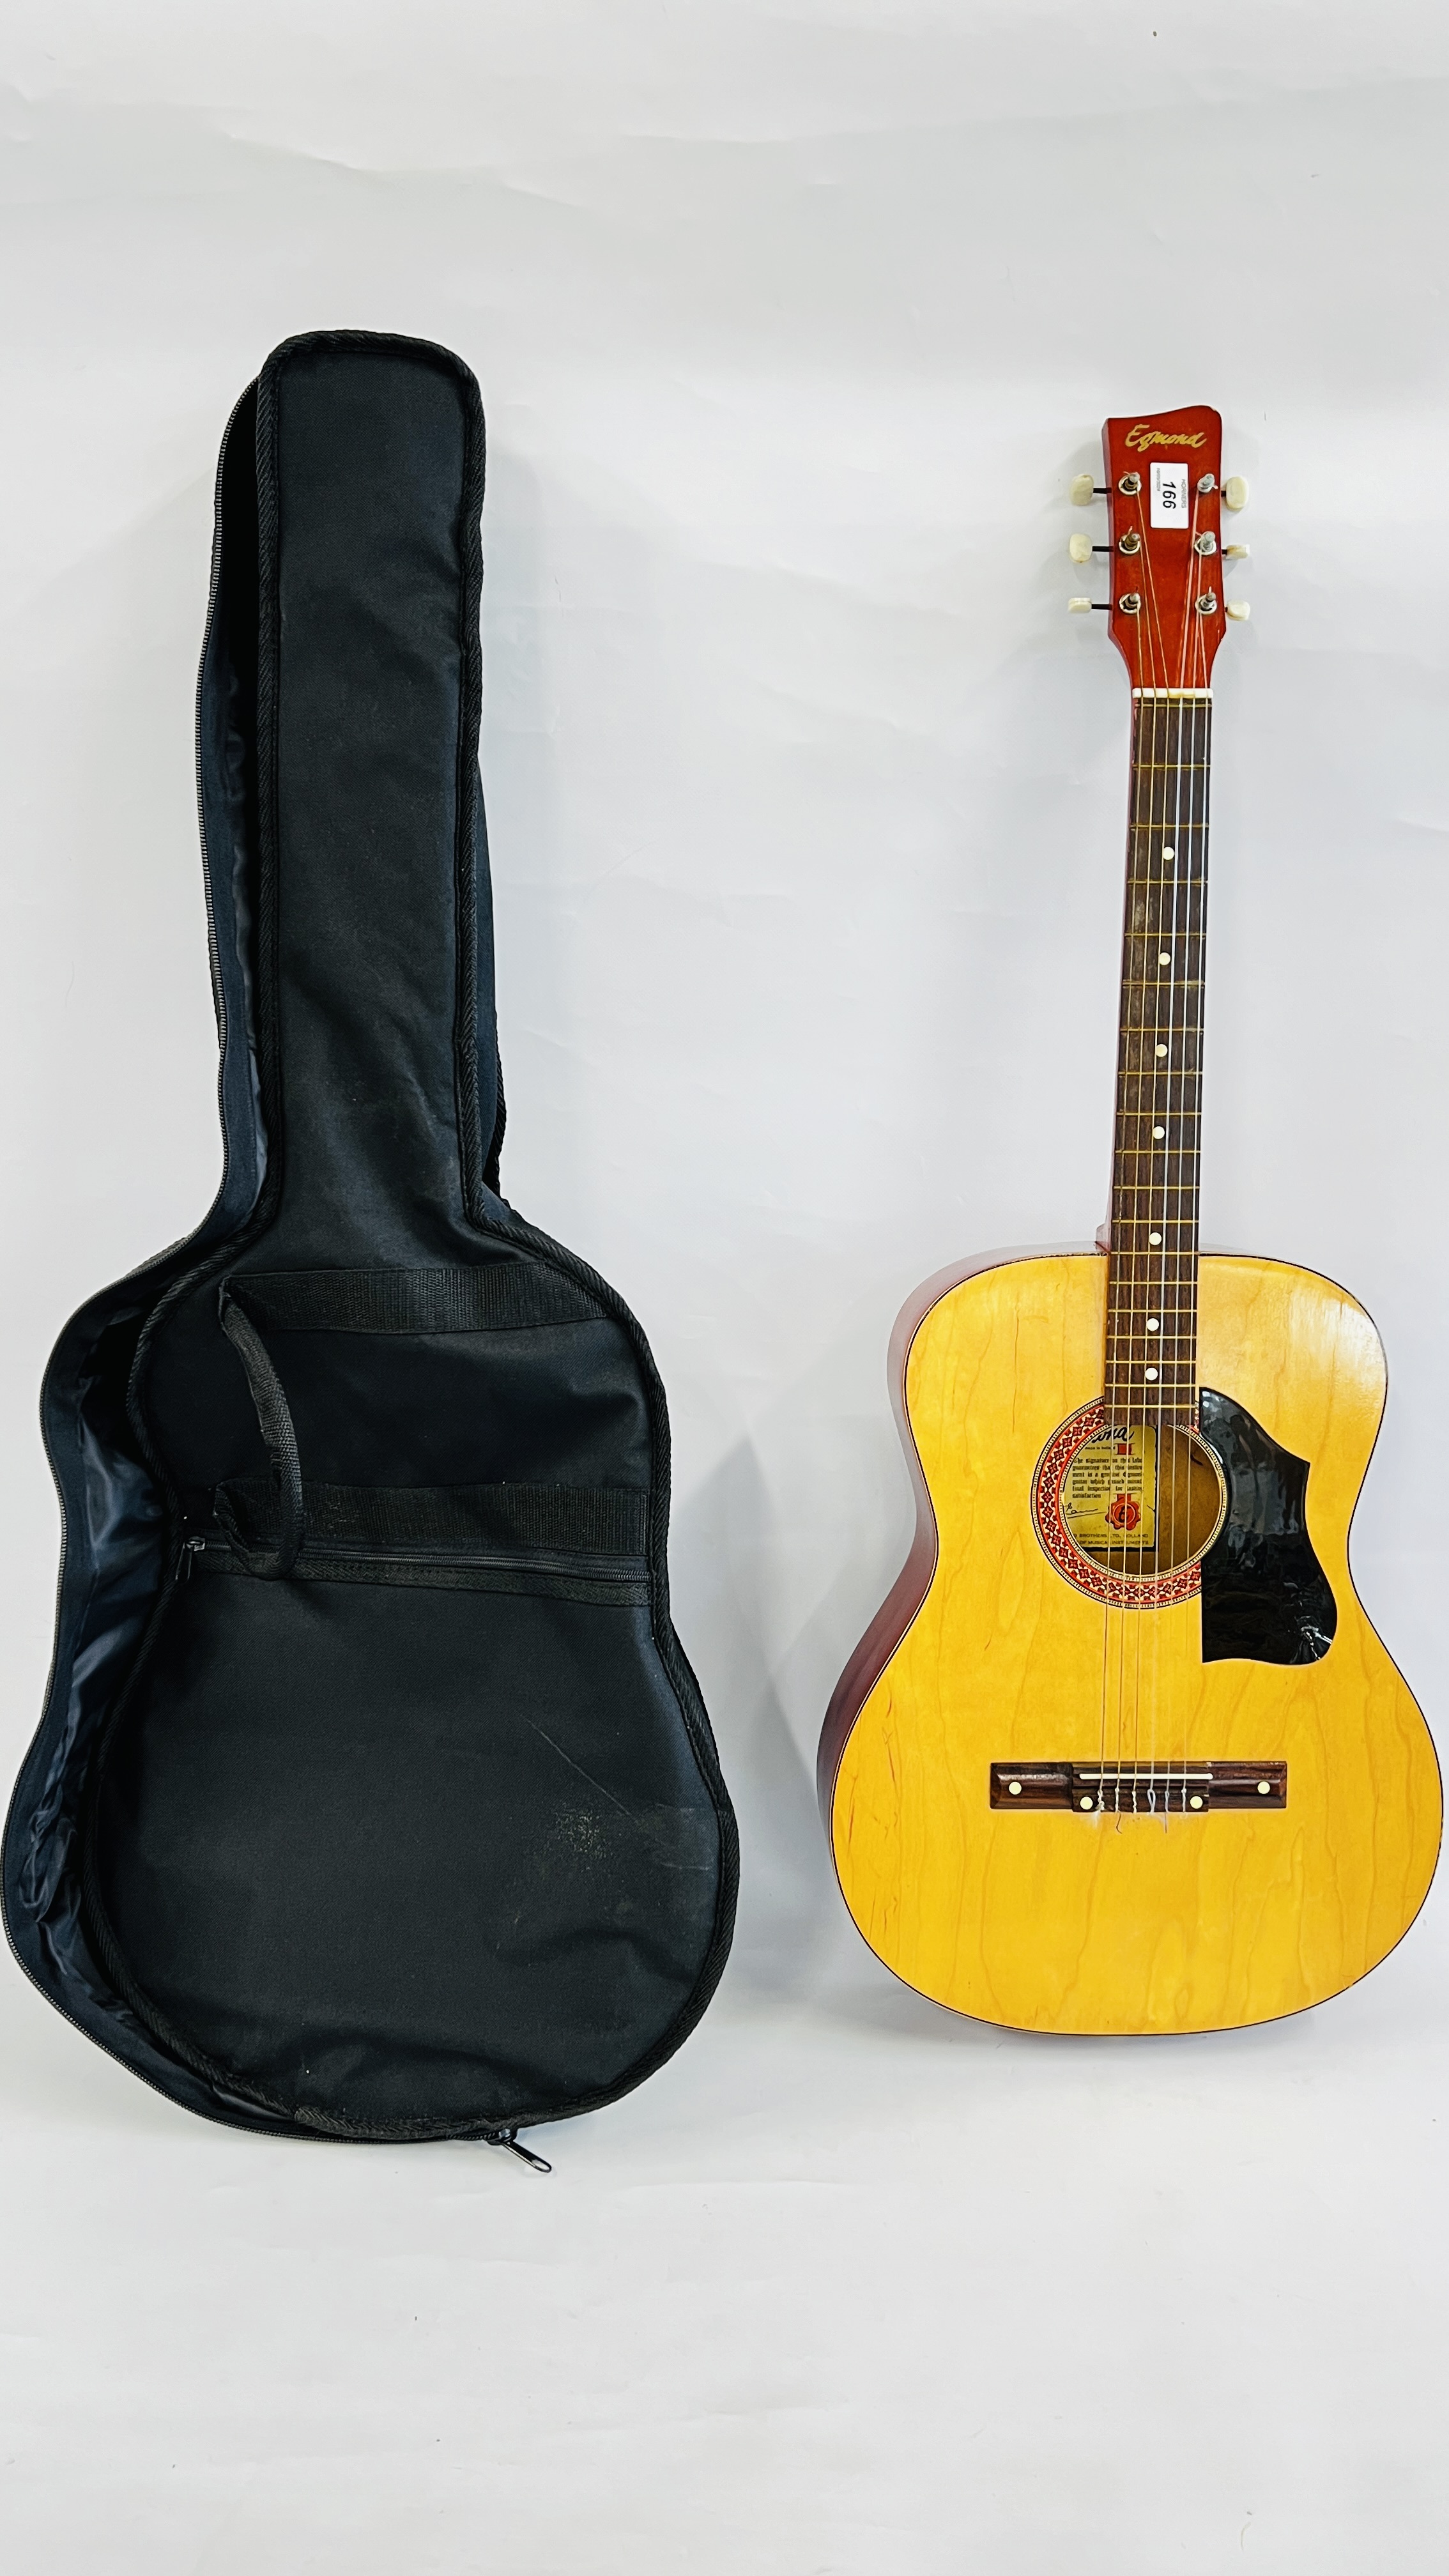 EGMOND BROTHERS LTD ACOUSTIC GUITAR IN CANVAS CARRY CASE WITH GUITAR BEGINNERS BOOK AND PITCH PIPE.